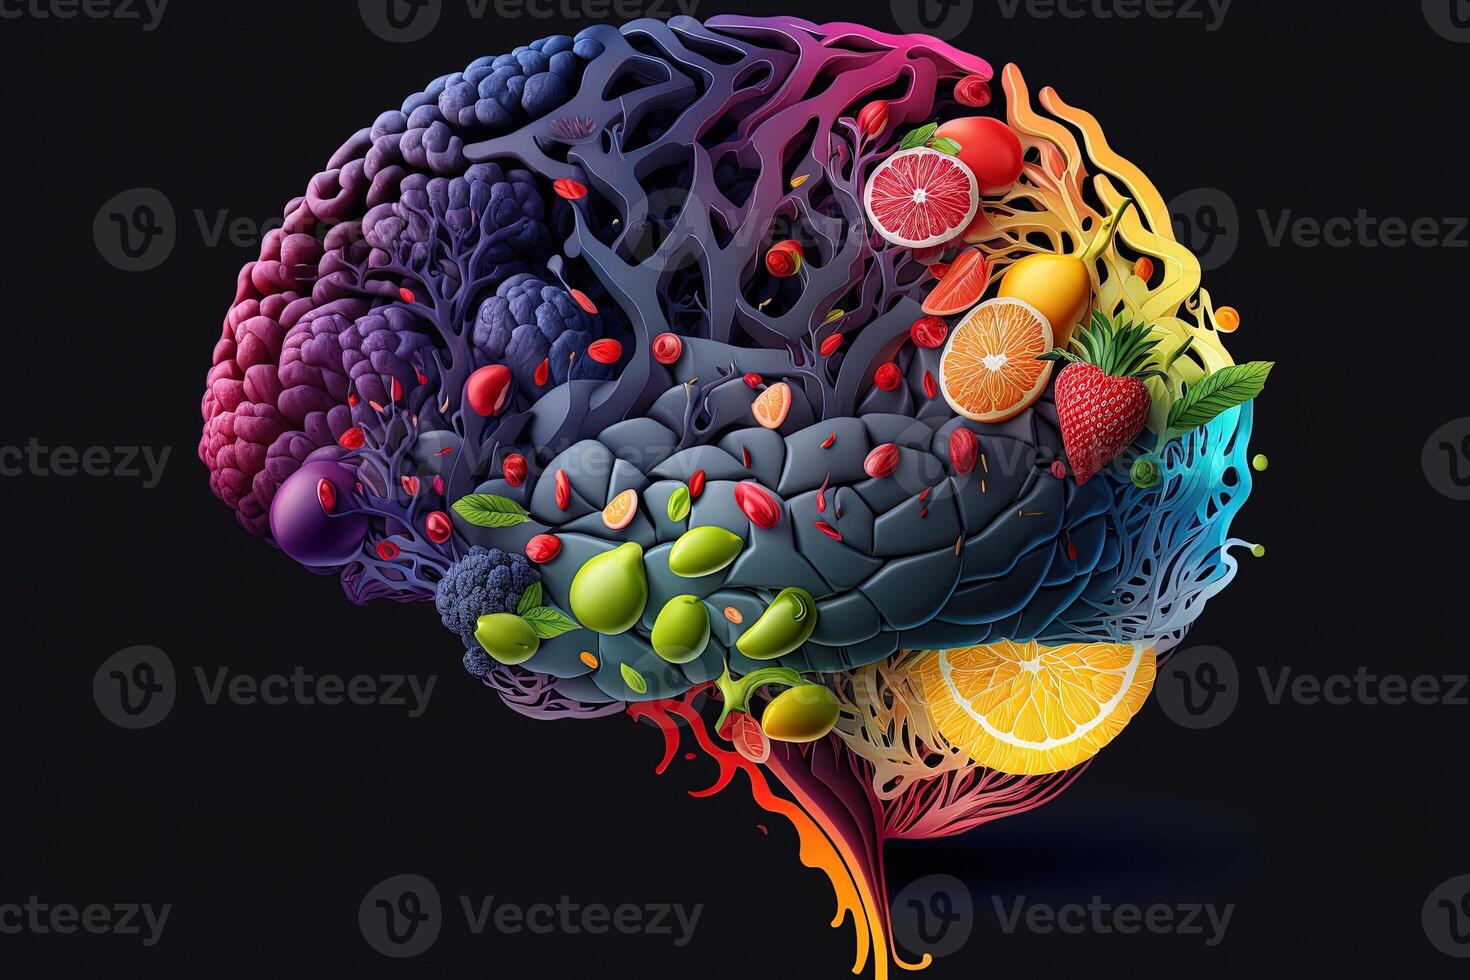 Human brain made of fruits and vegetables created using technology. Concept of nutritious foods for brain health and memory. Illustration Healthy brain food to boost brainpower nutrition photo